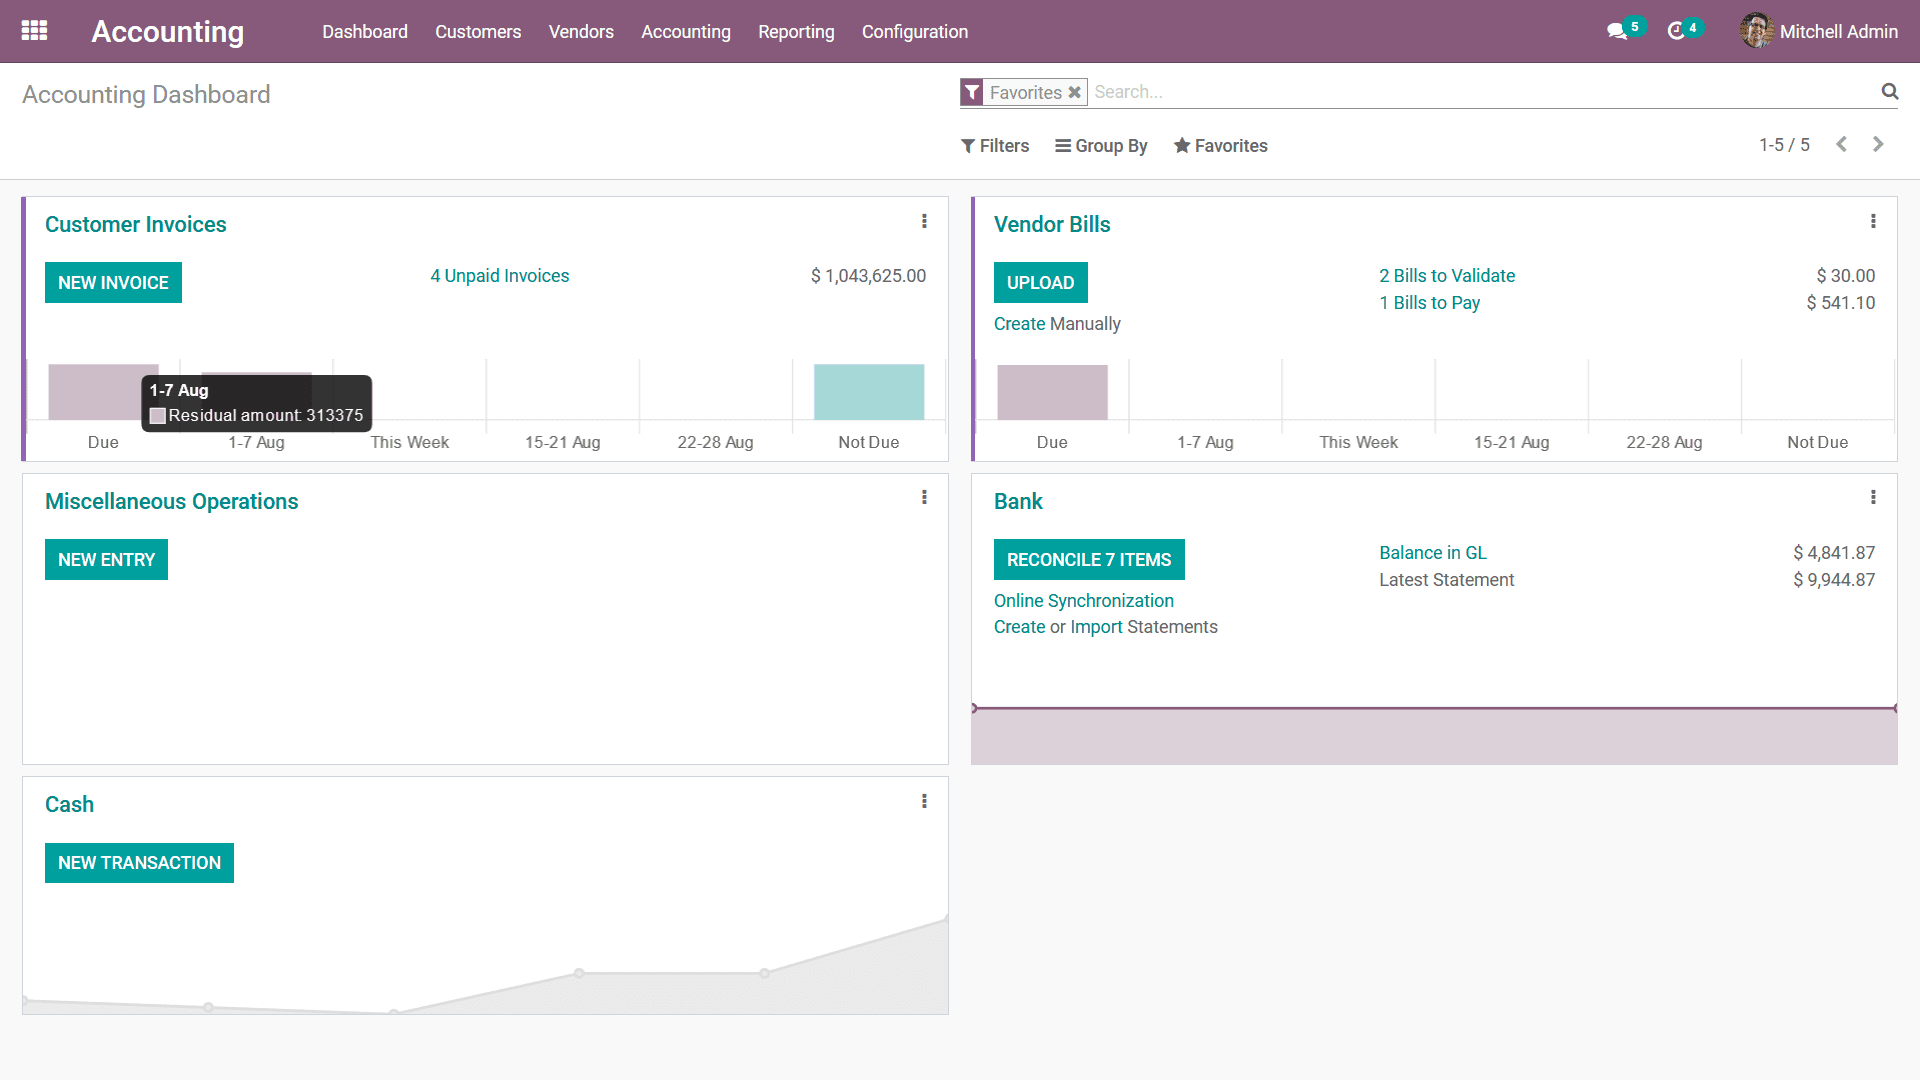 Financial management aspects of vendors and customers with Odoo Accounting